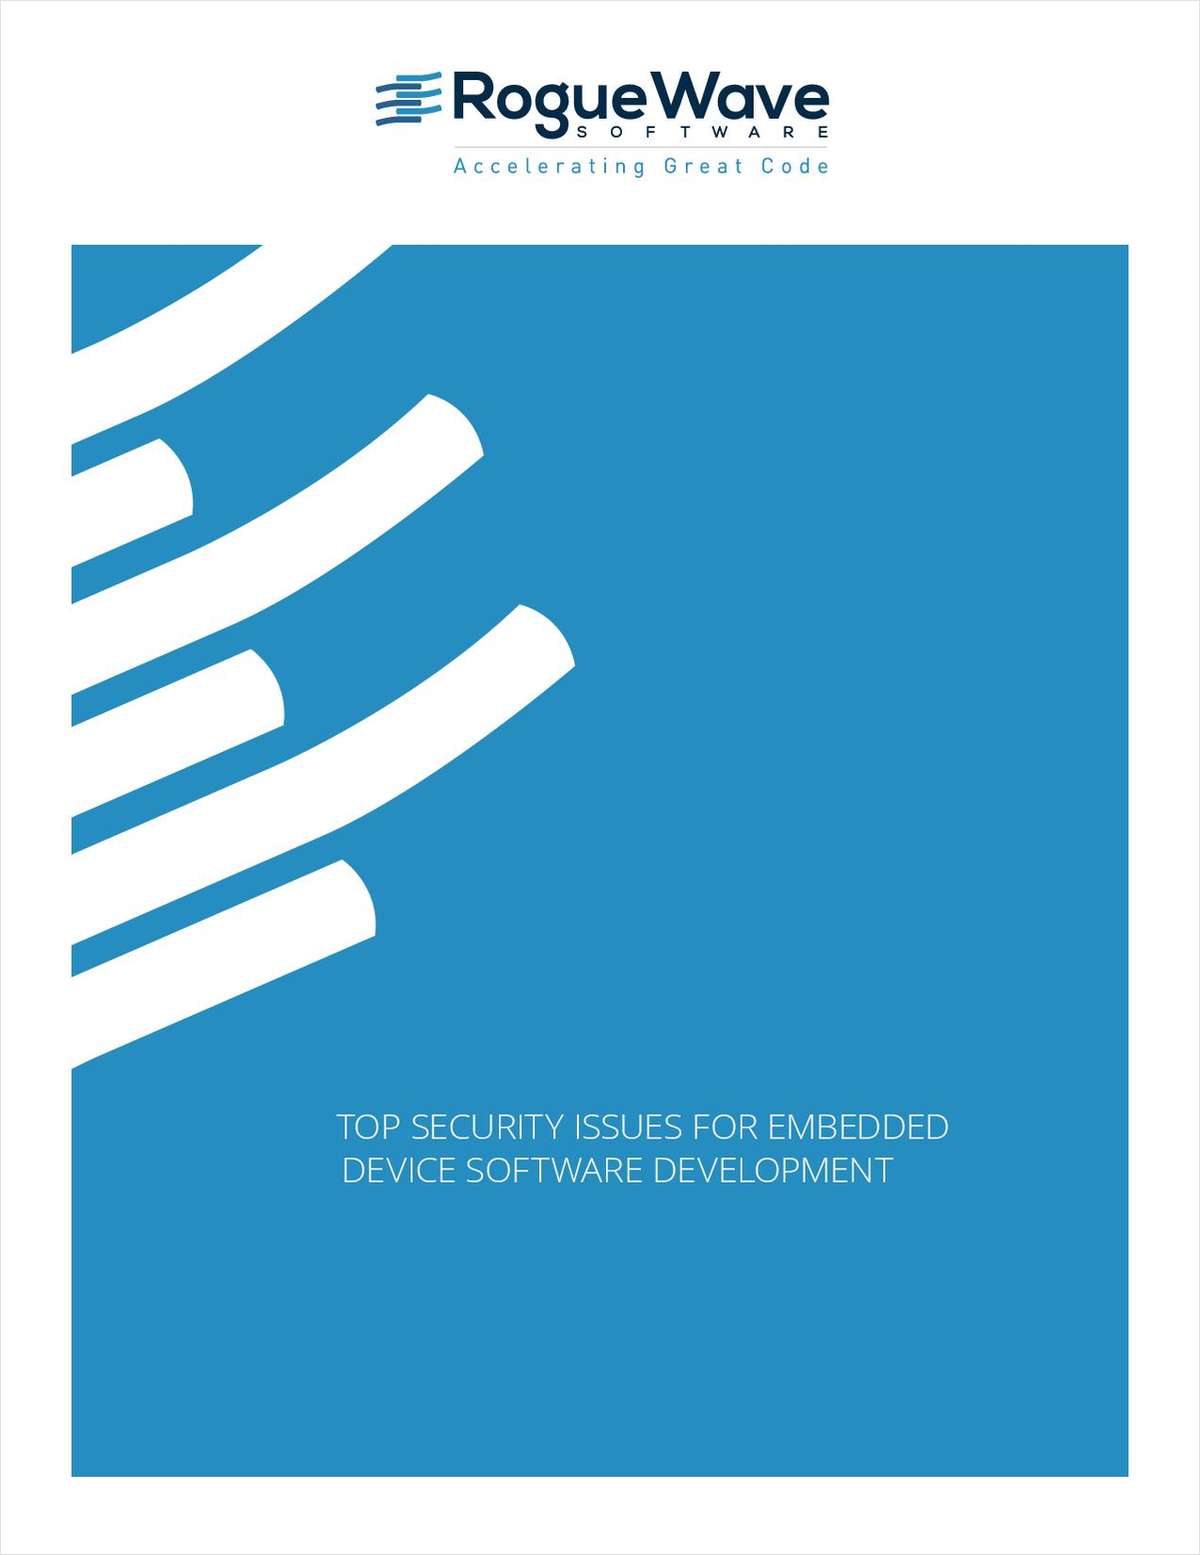 Top Security Issues for Embedded Device Software Development